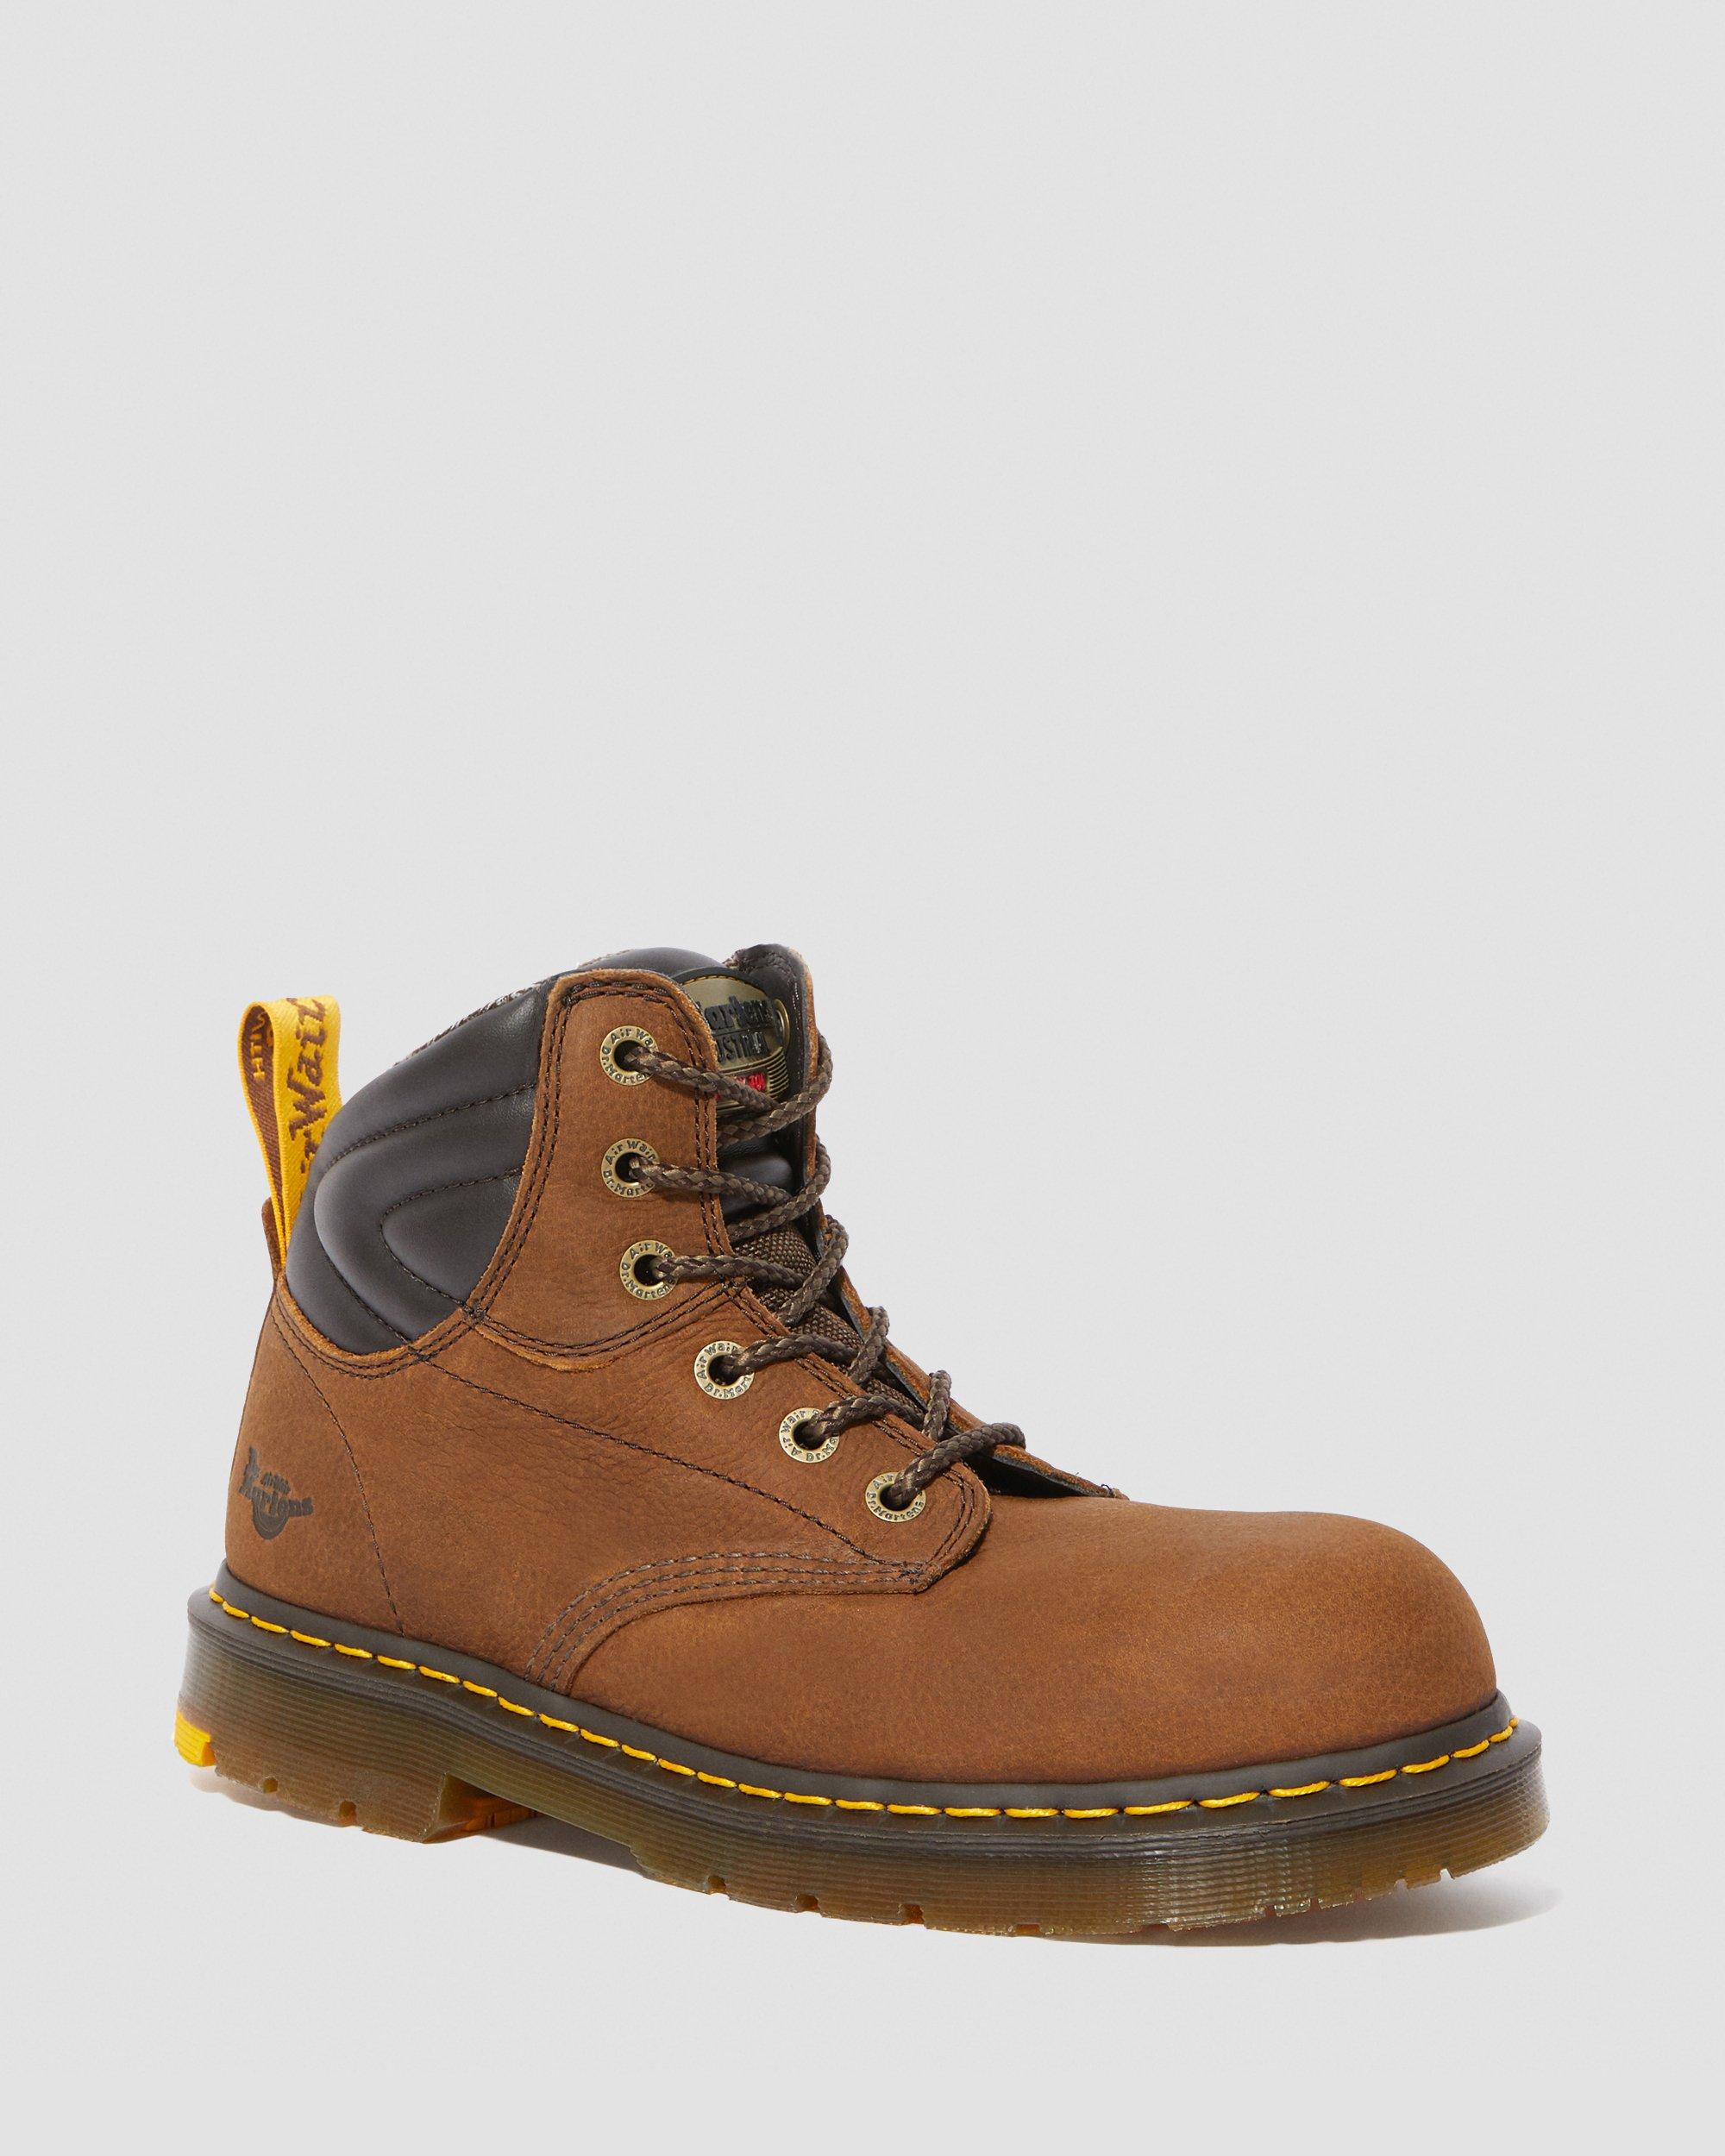 Hynine Safety Toe Work Boots Dr. Martens